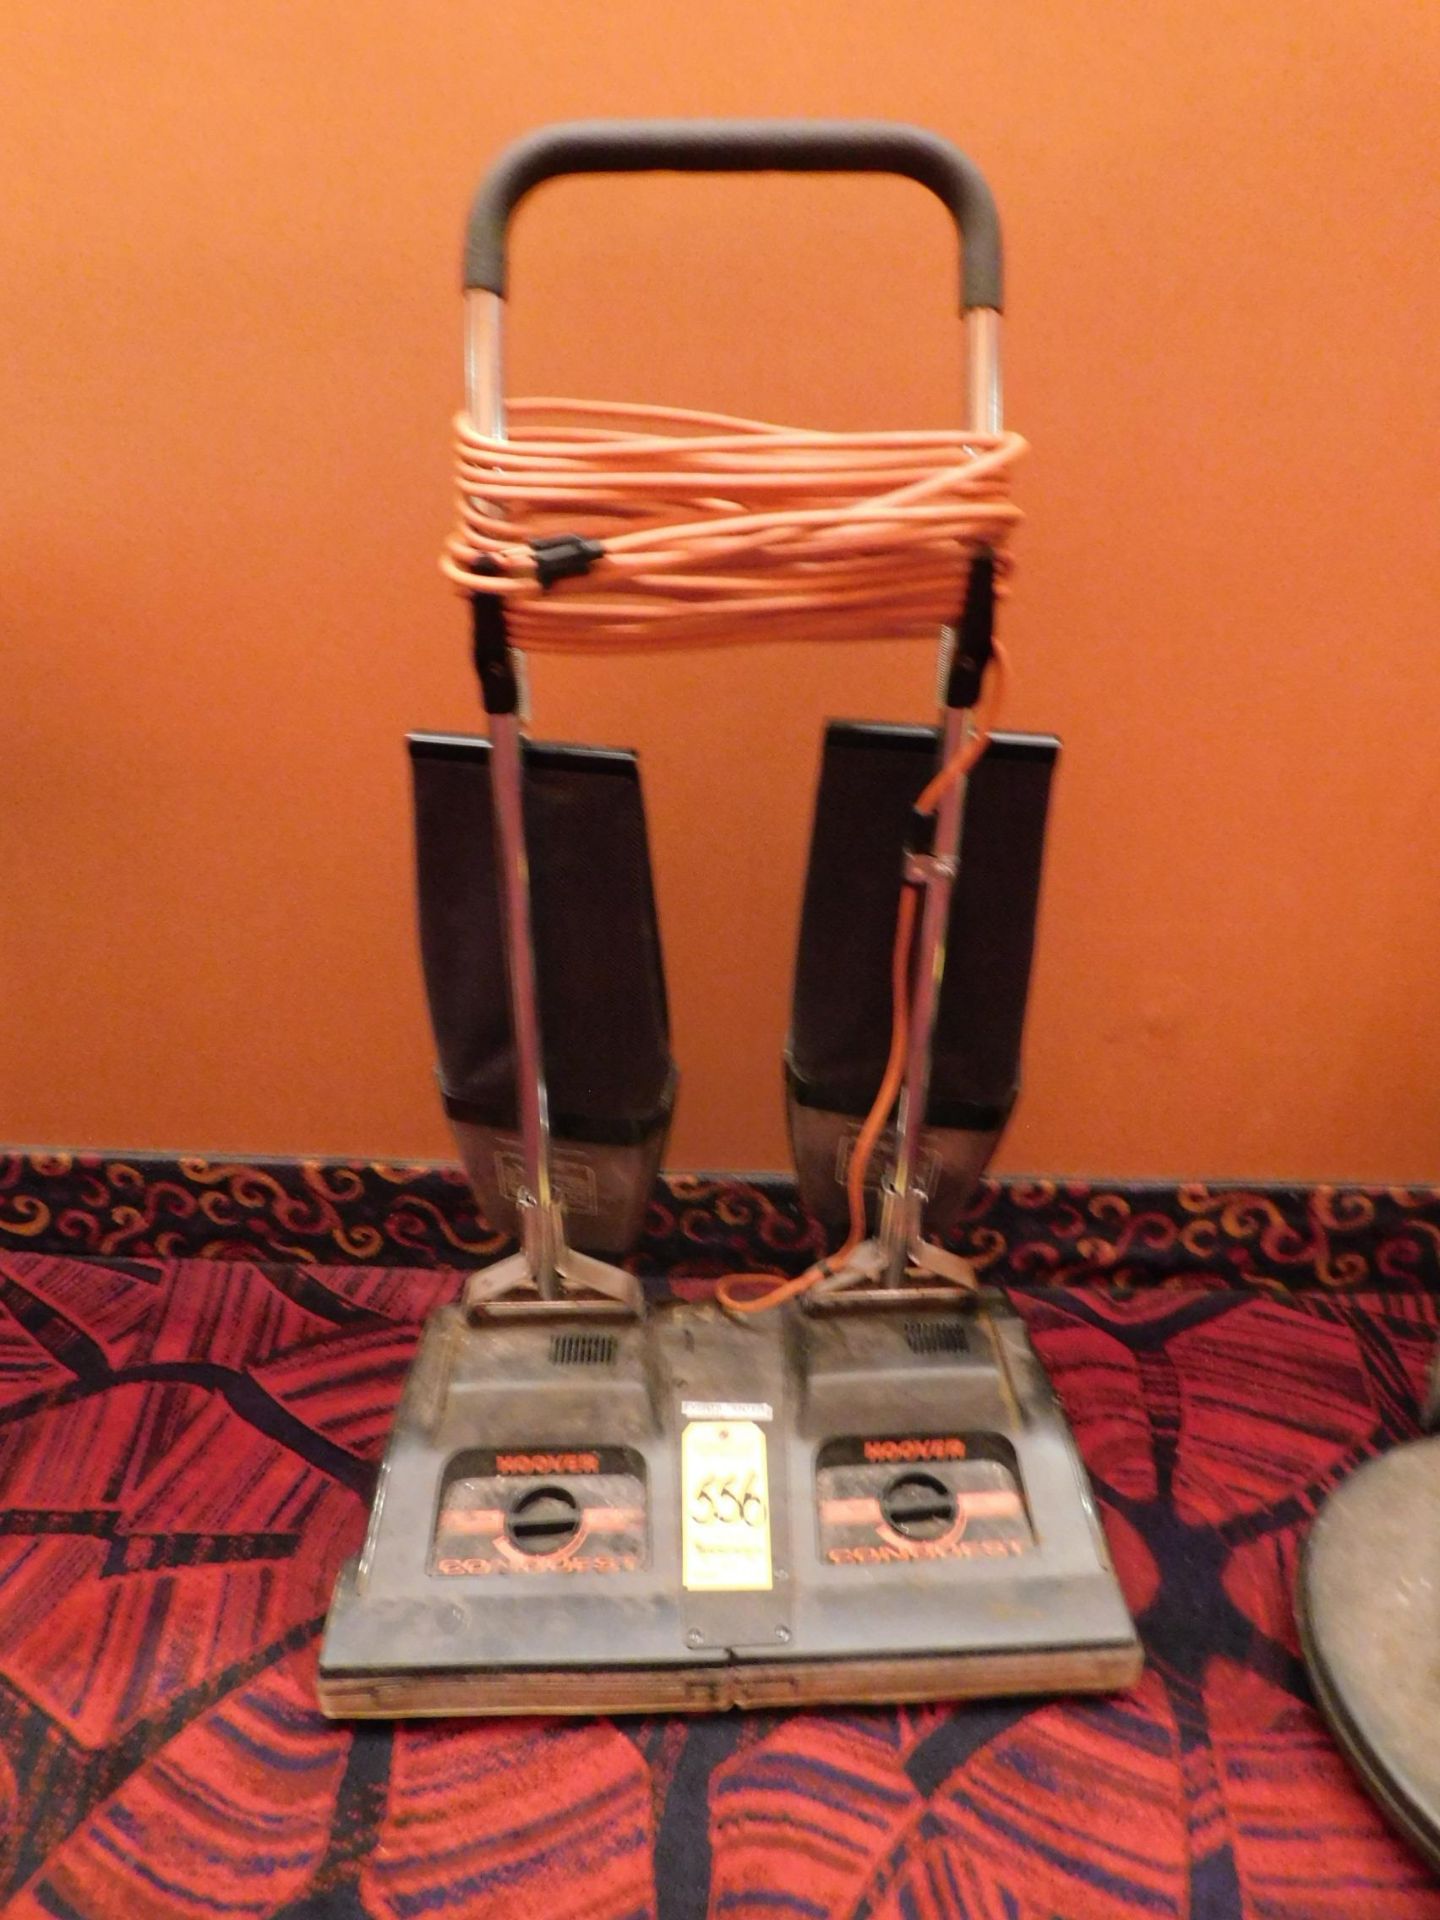 Hoover Conquest Double Floor Sweeper